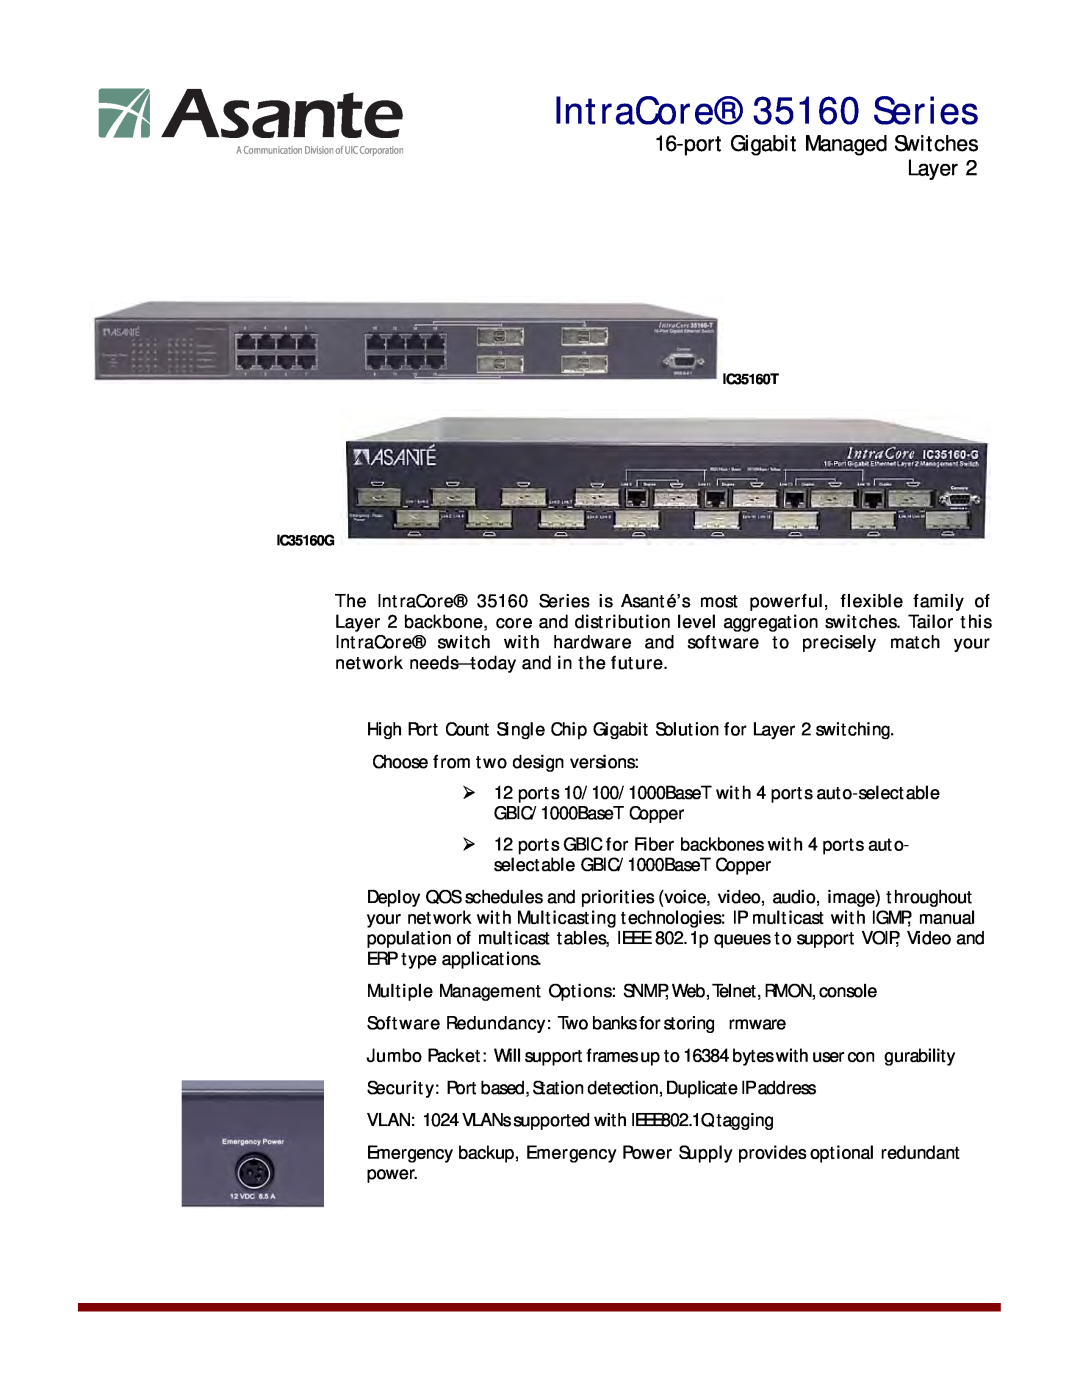 Asante Technologies IC35160T, IC35160G manual IntraCore 35160 Series, port Gigabit Managed Switches Layer 